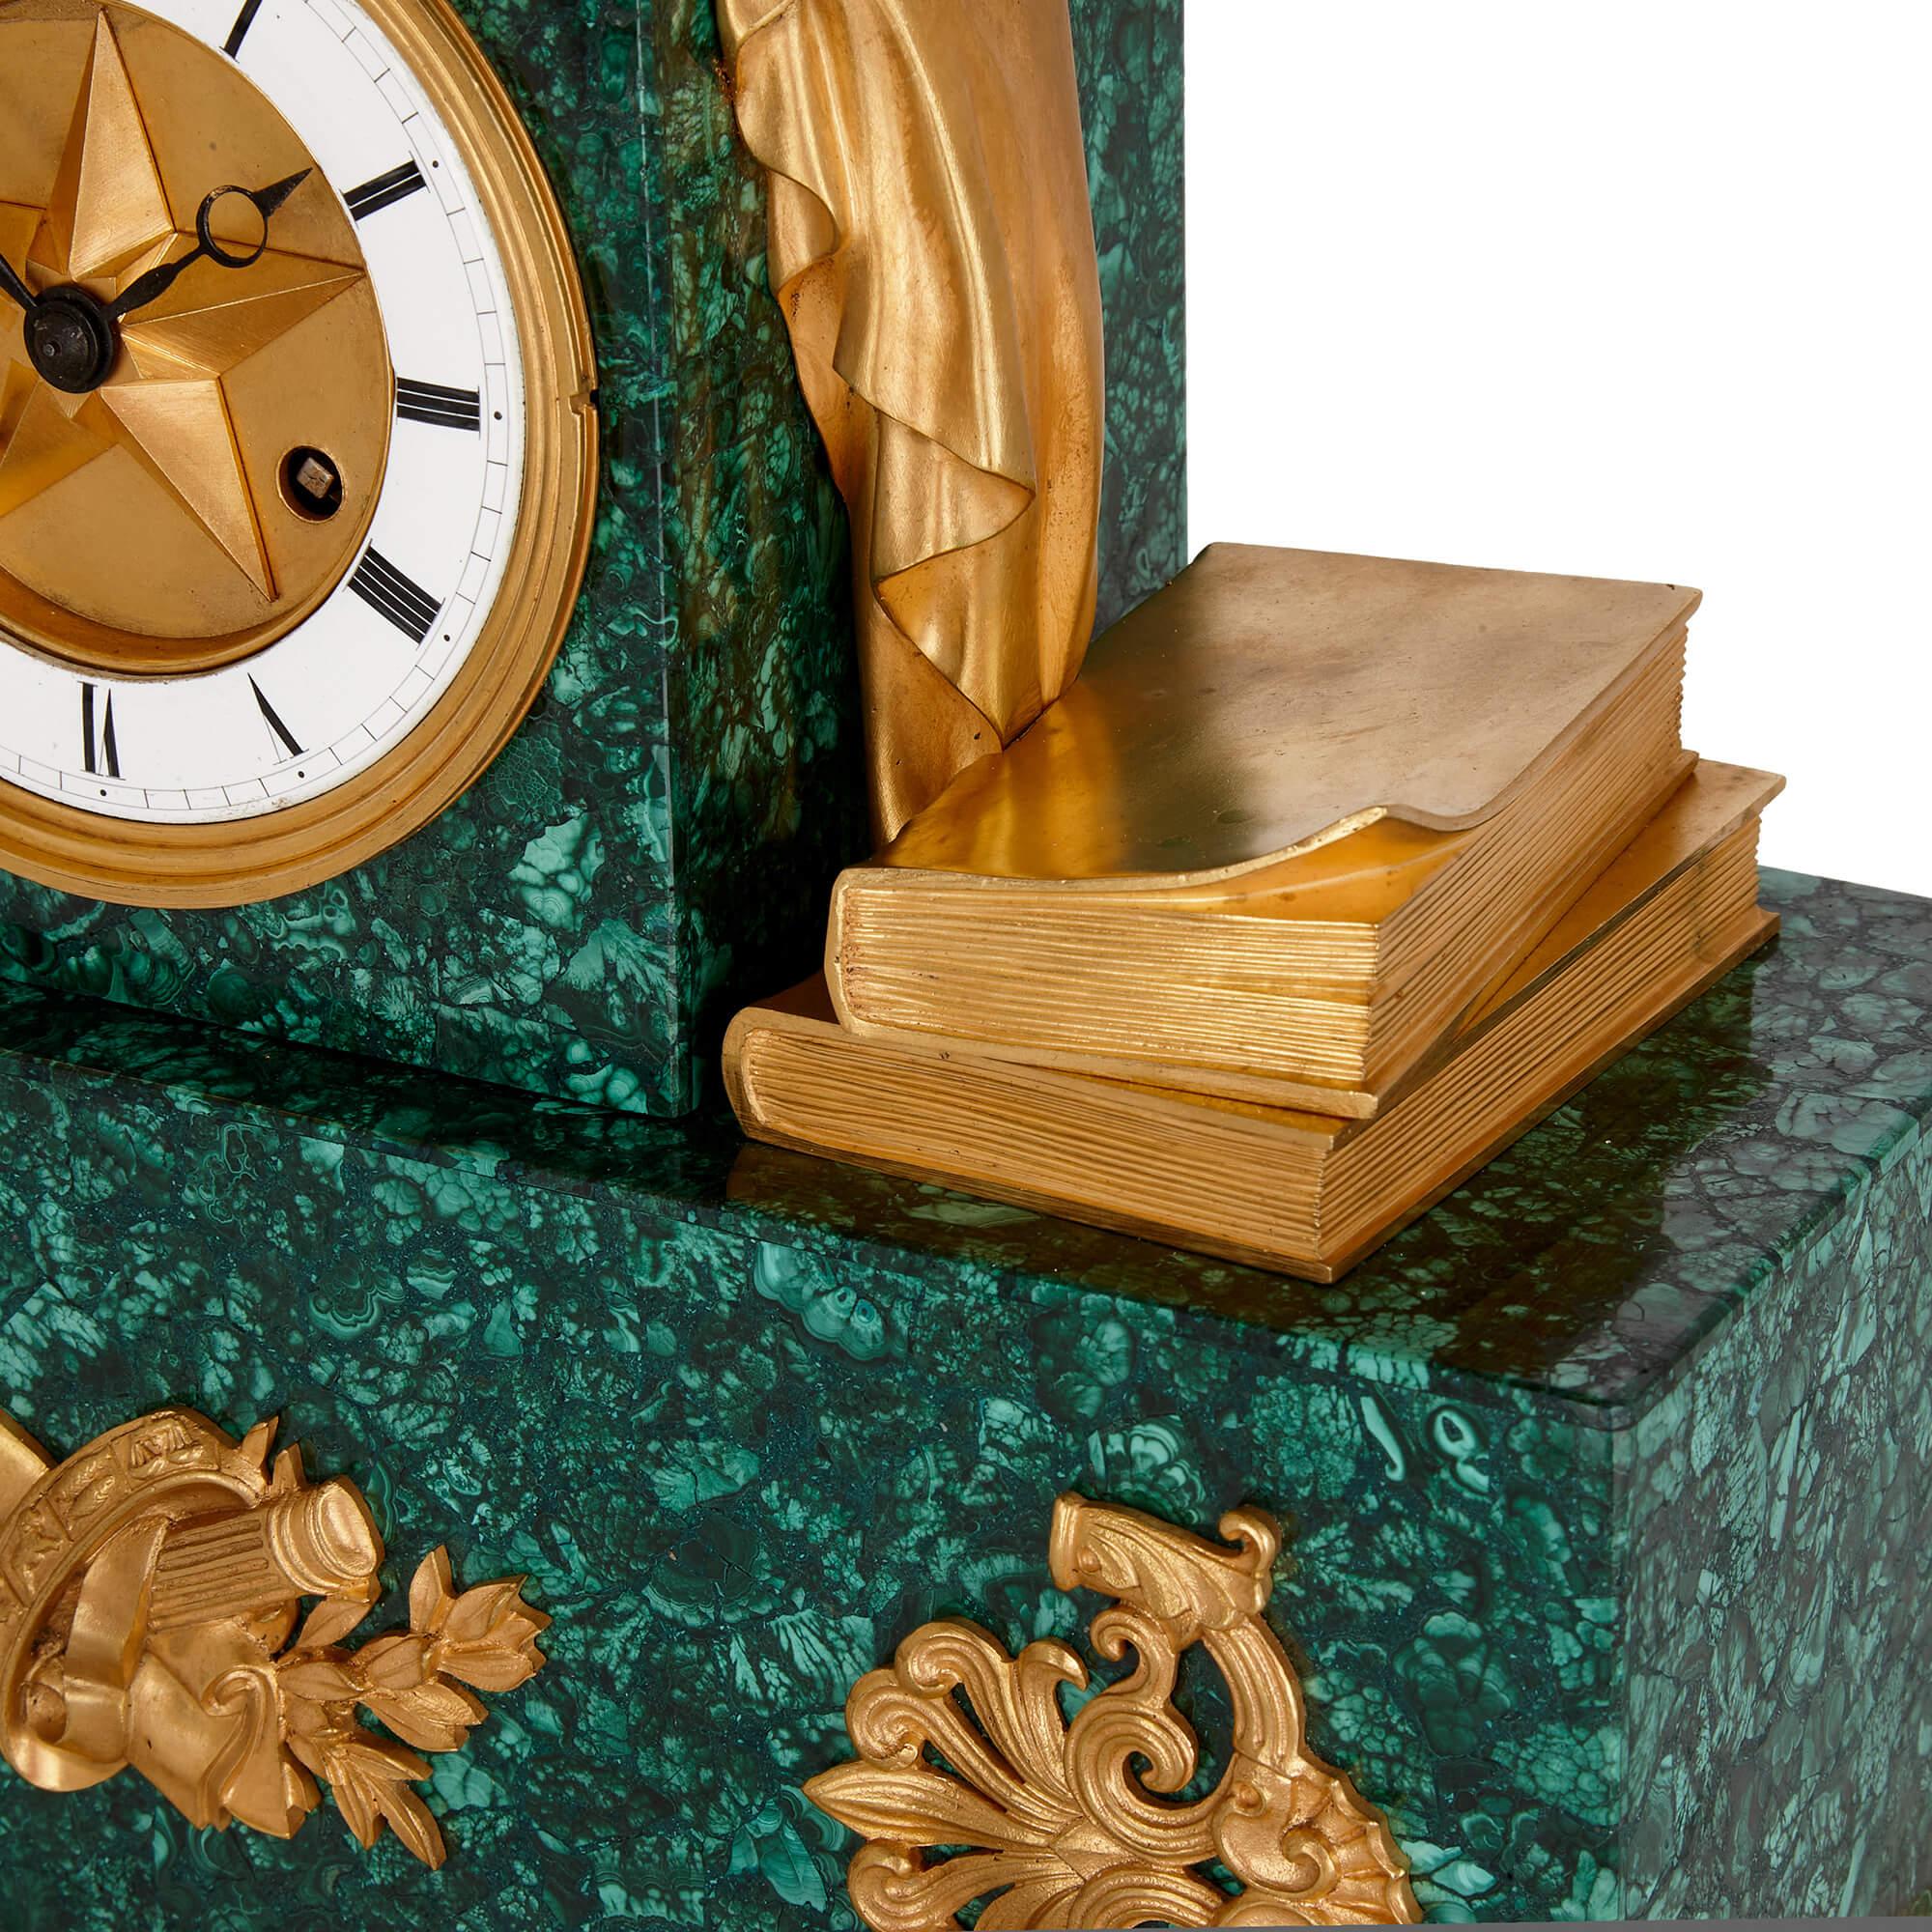 Charles X Period Gilt-Bronze and Malachite Sculptural Mantel Clock For Sale 1